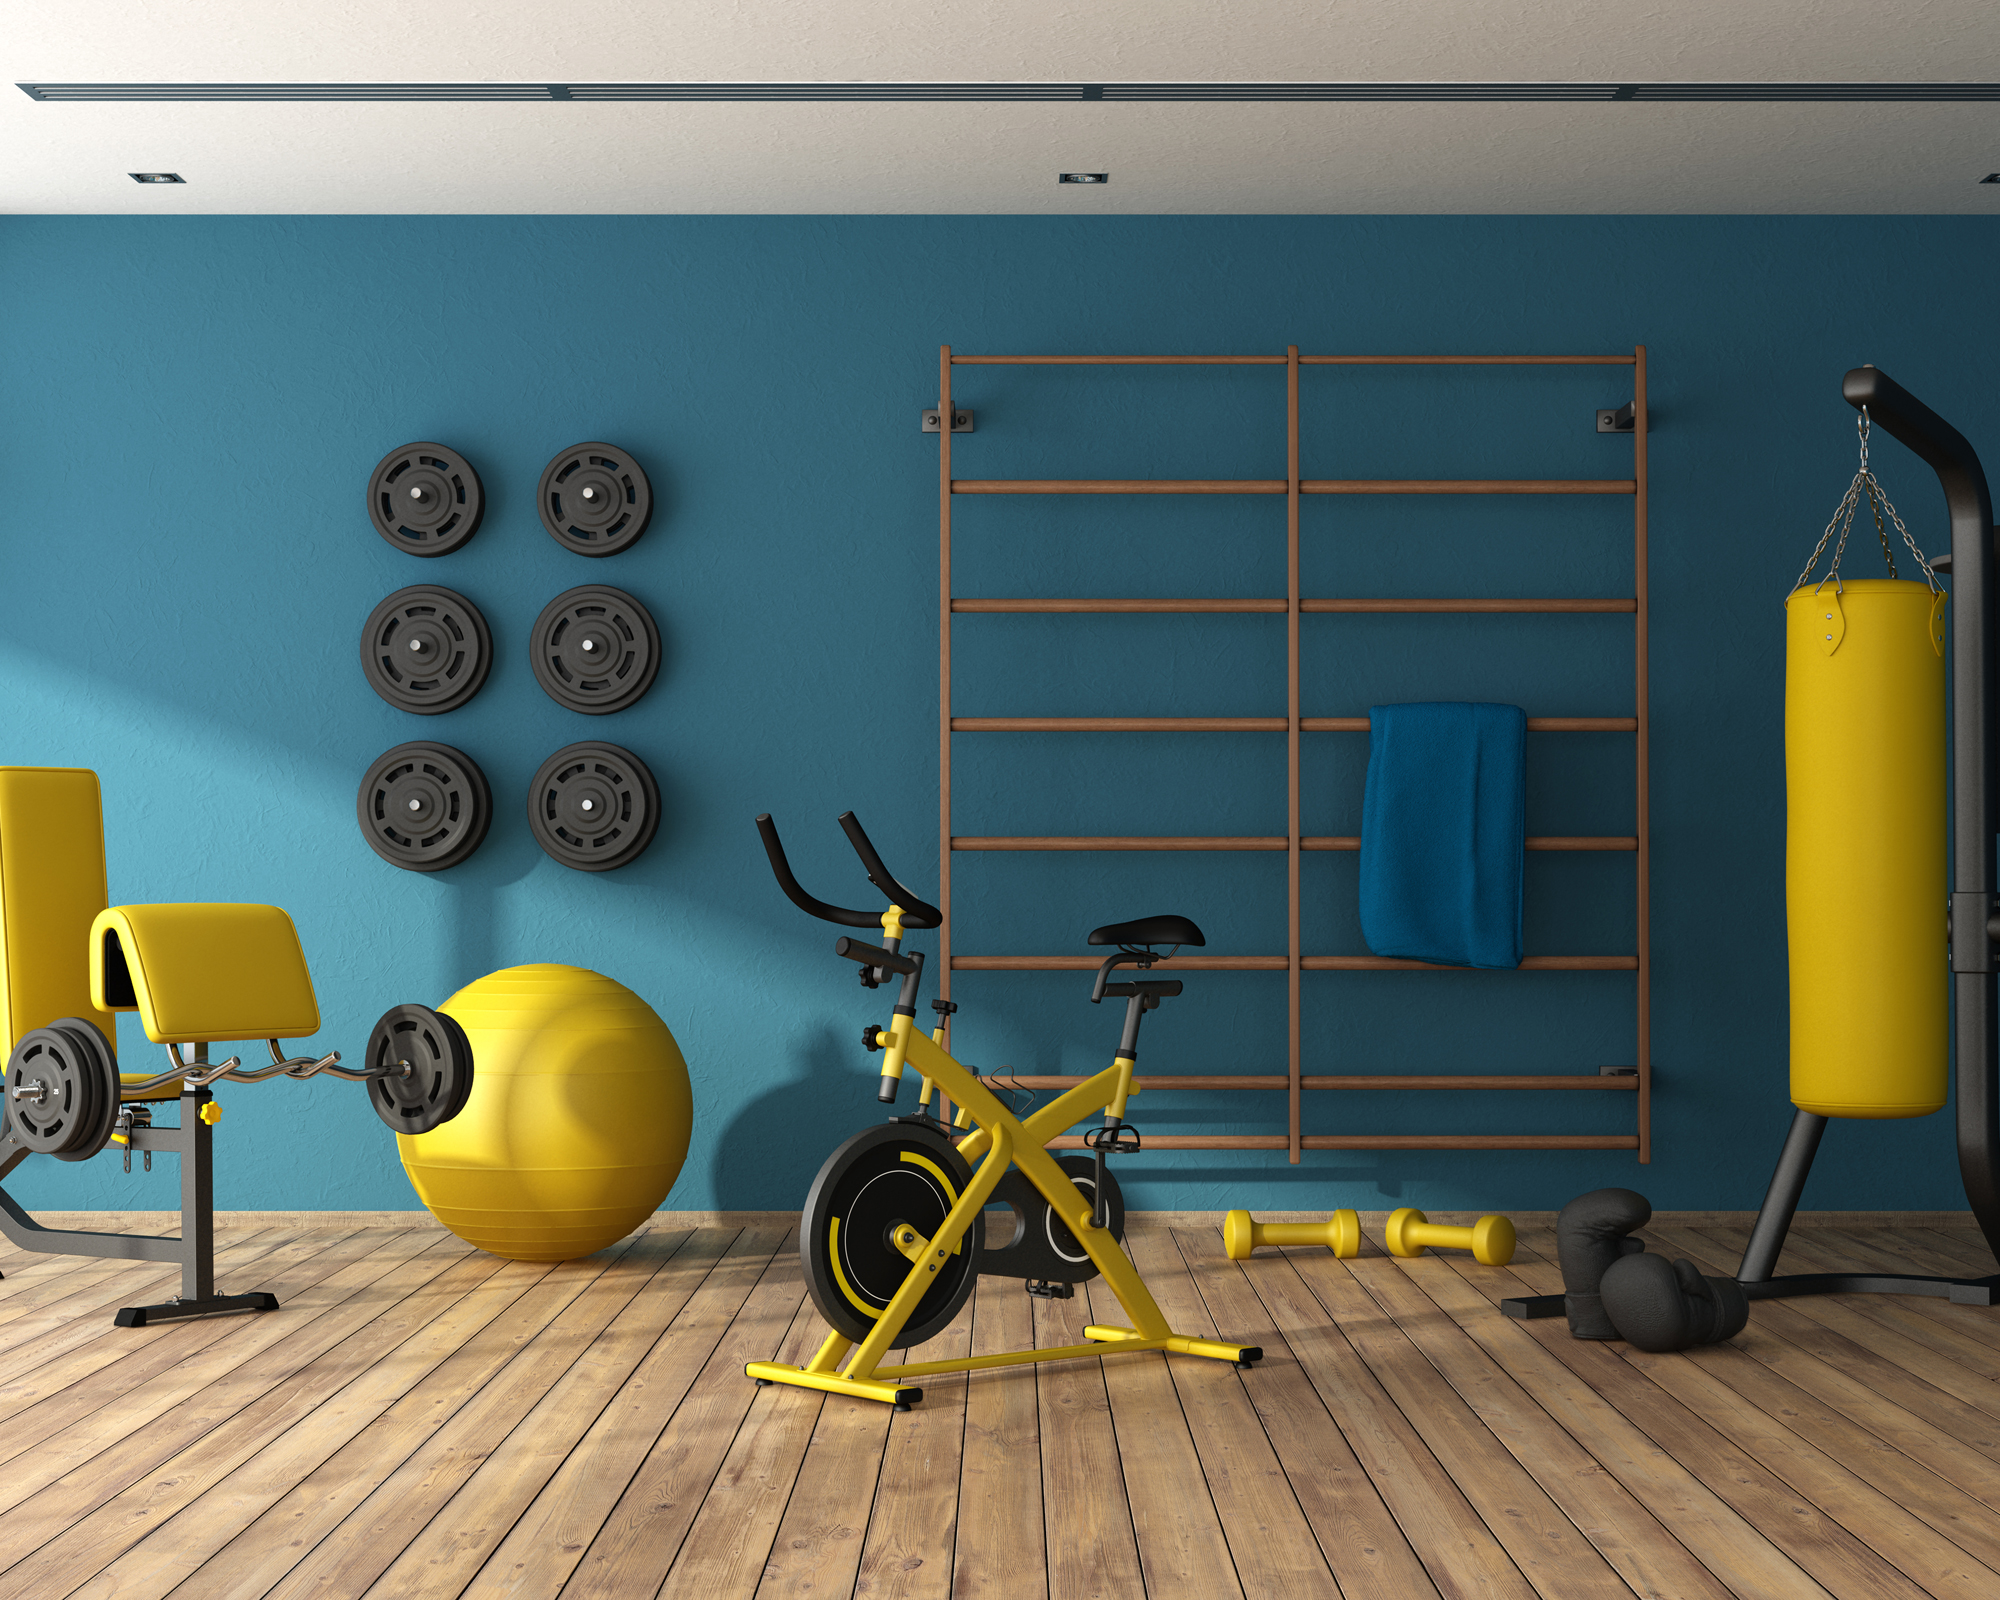 How to Properly Clean and Maintain Your Home Gym Equipment